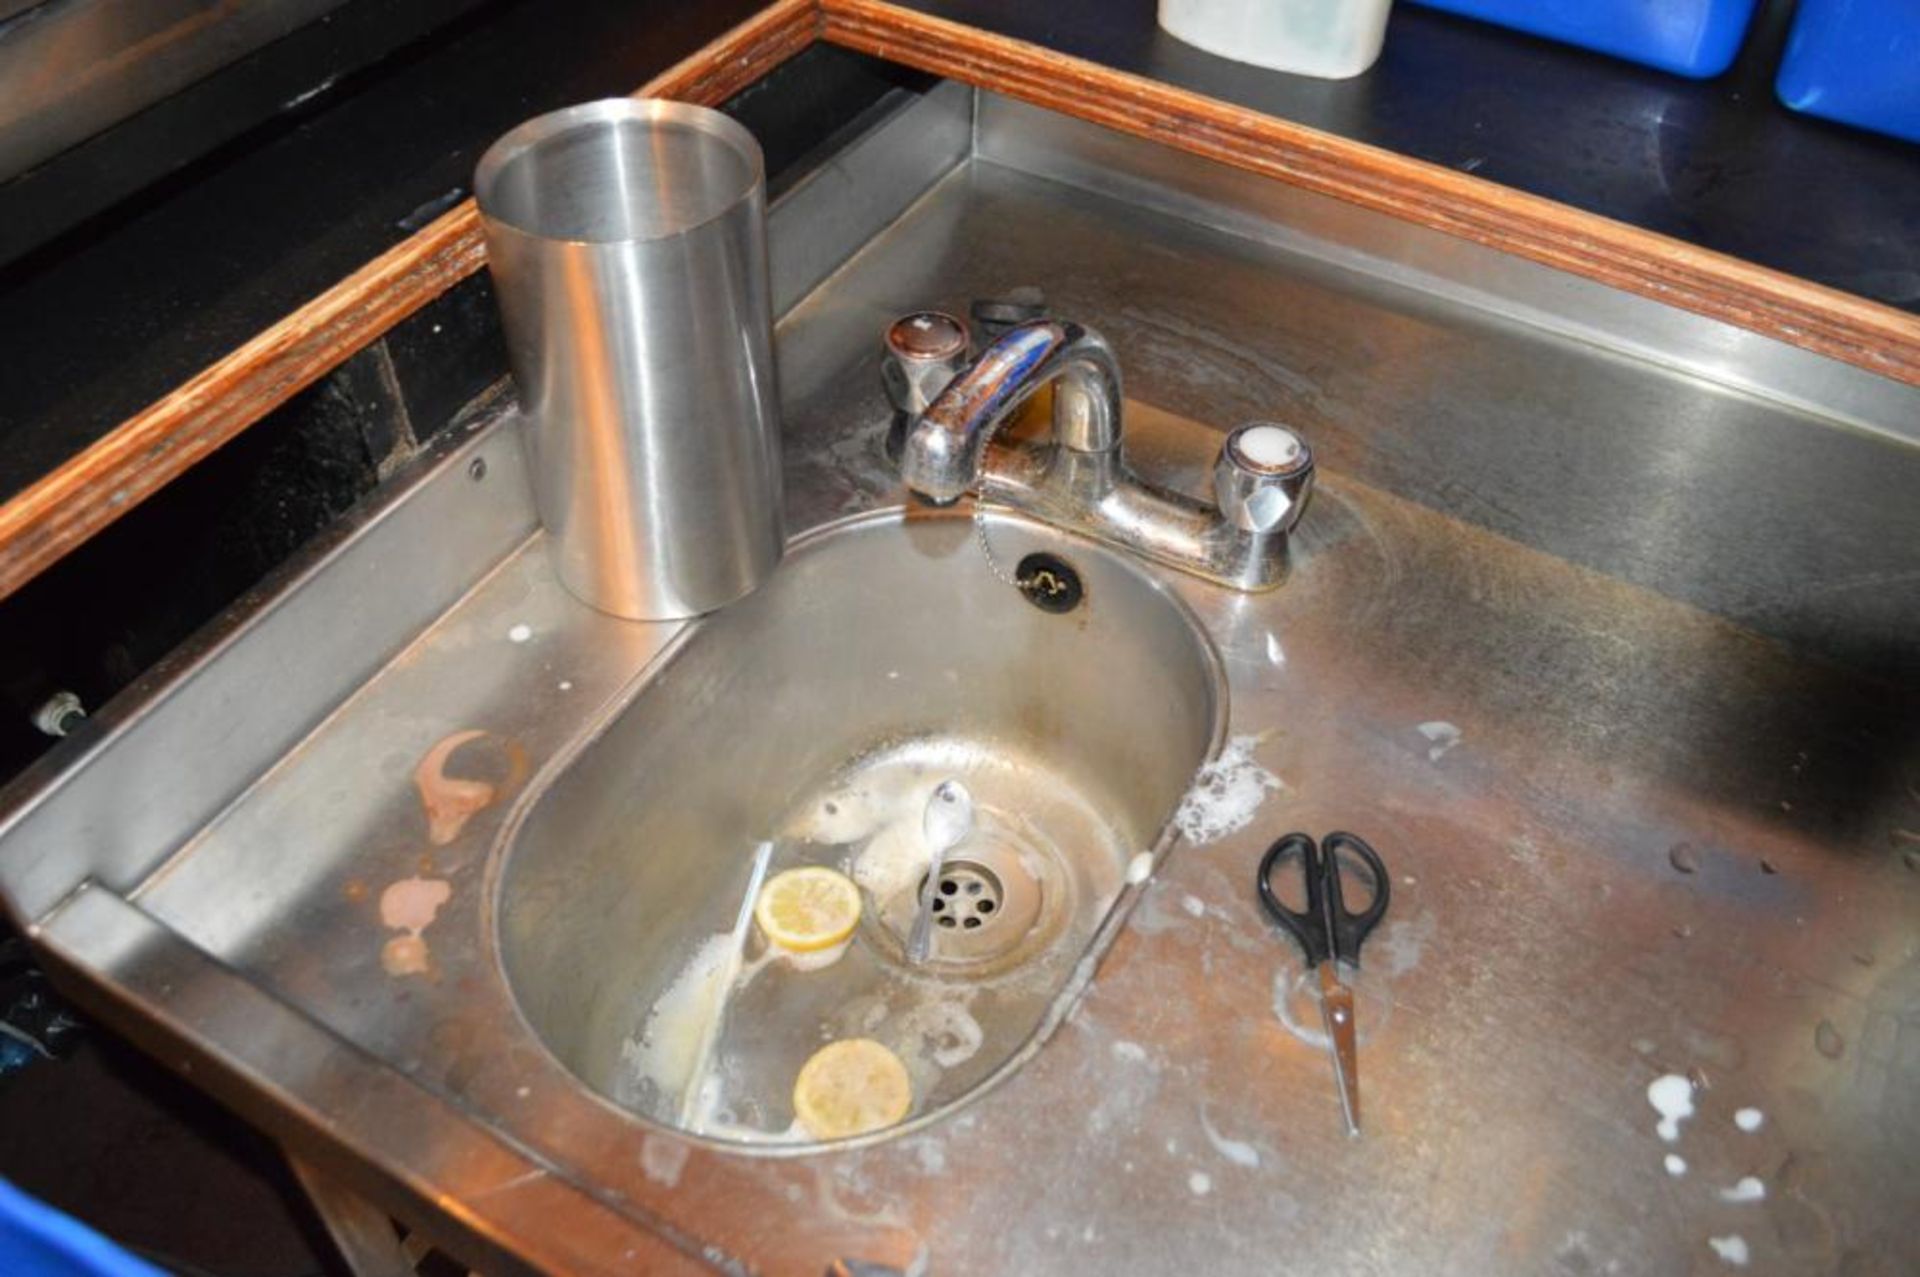 1 x Stainless Prep Bench With Undershelf, Sink Basin and Mixer Tap - H85 x W110 x D75 cms - Ref FB11 - Image 2 of 3